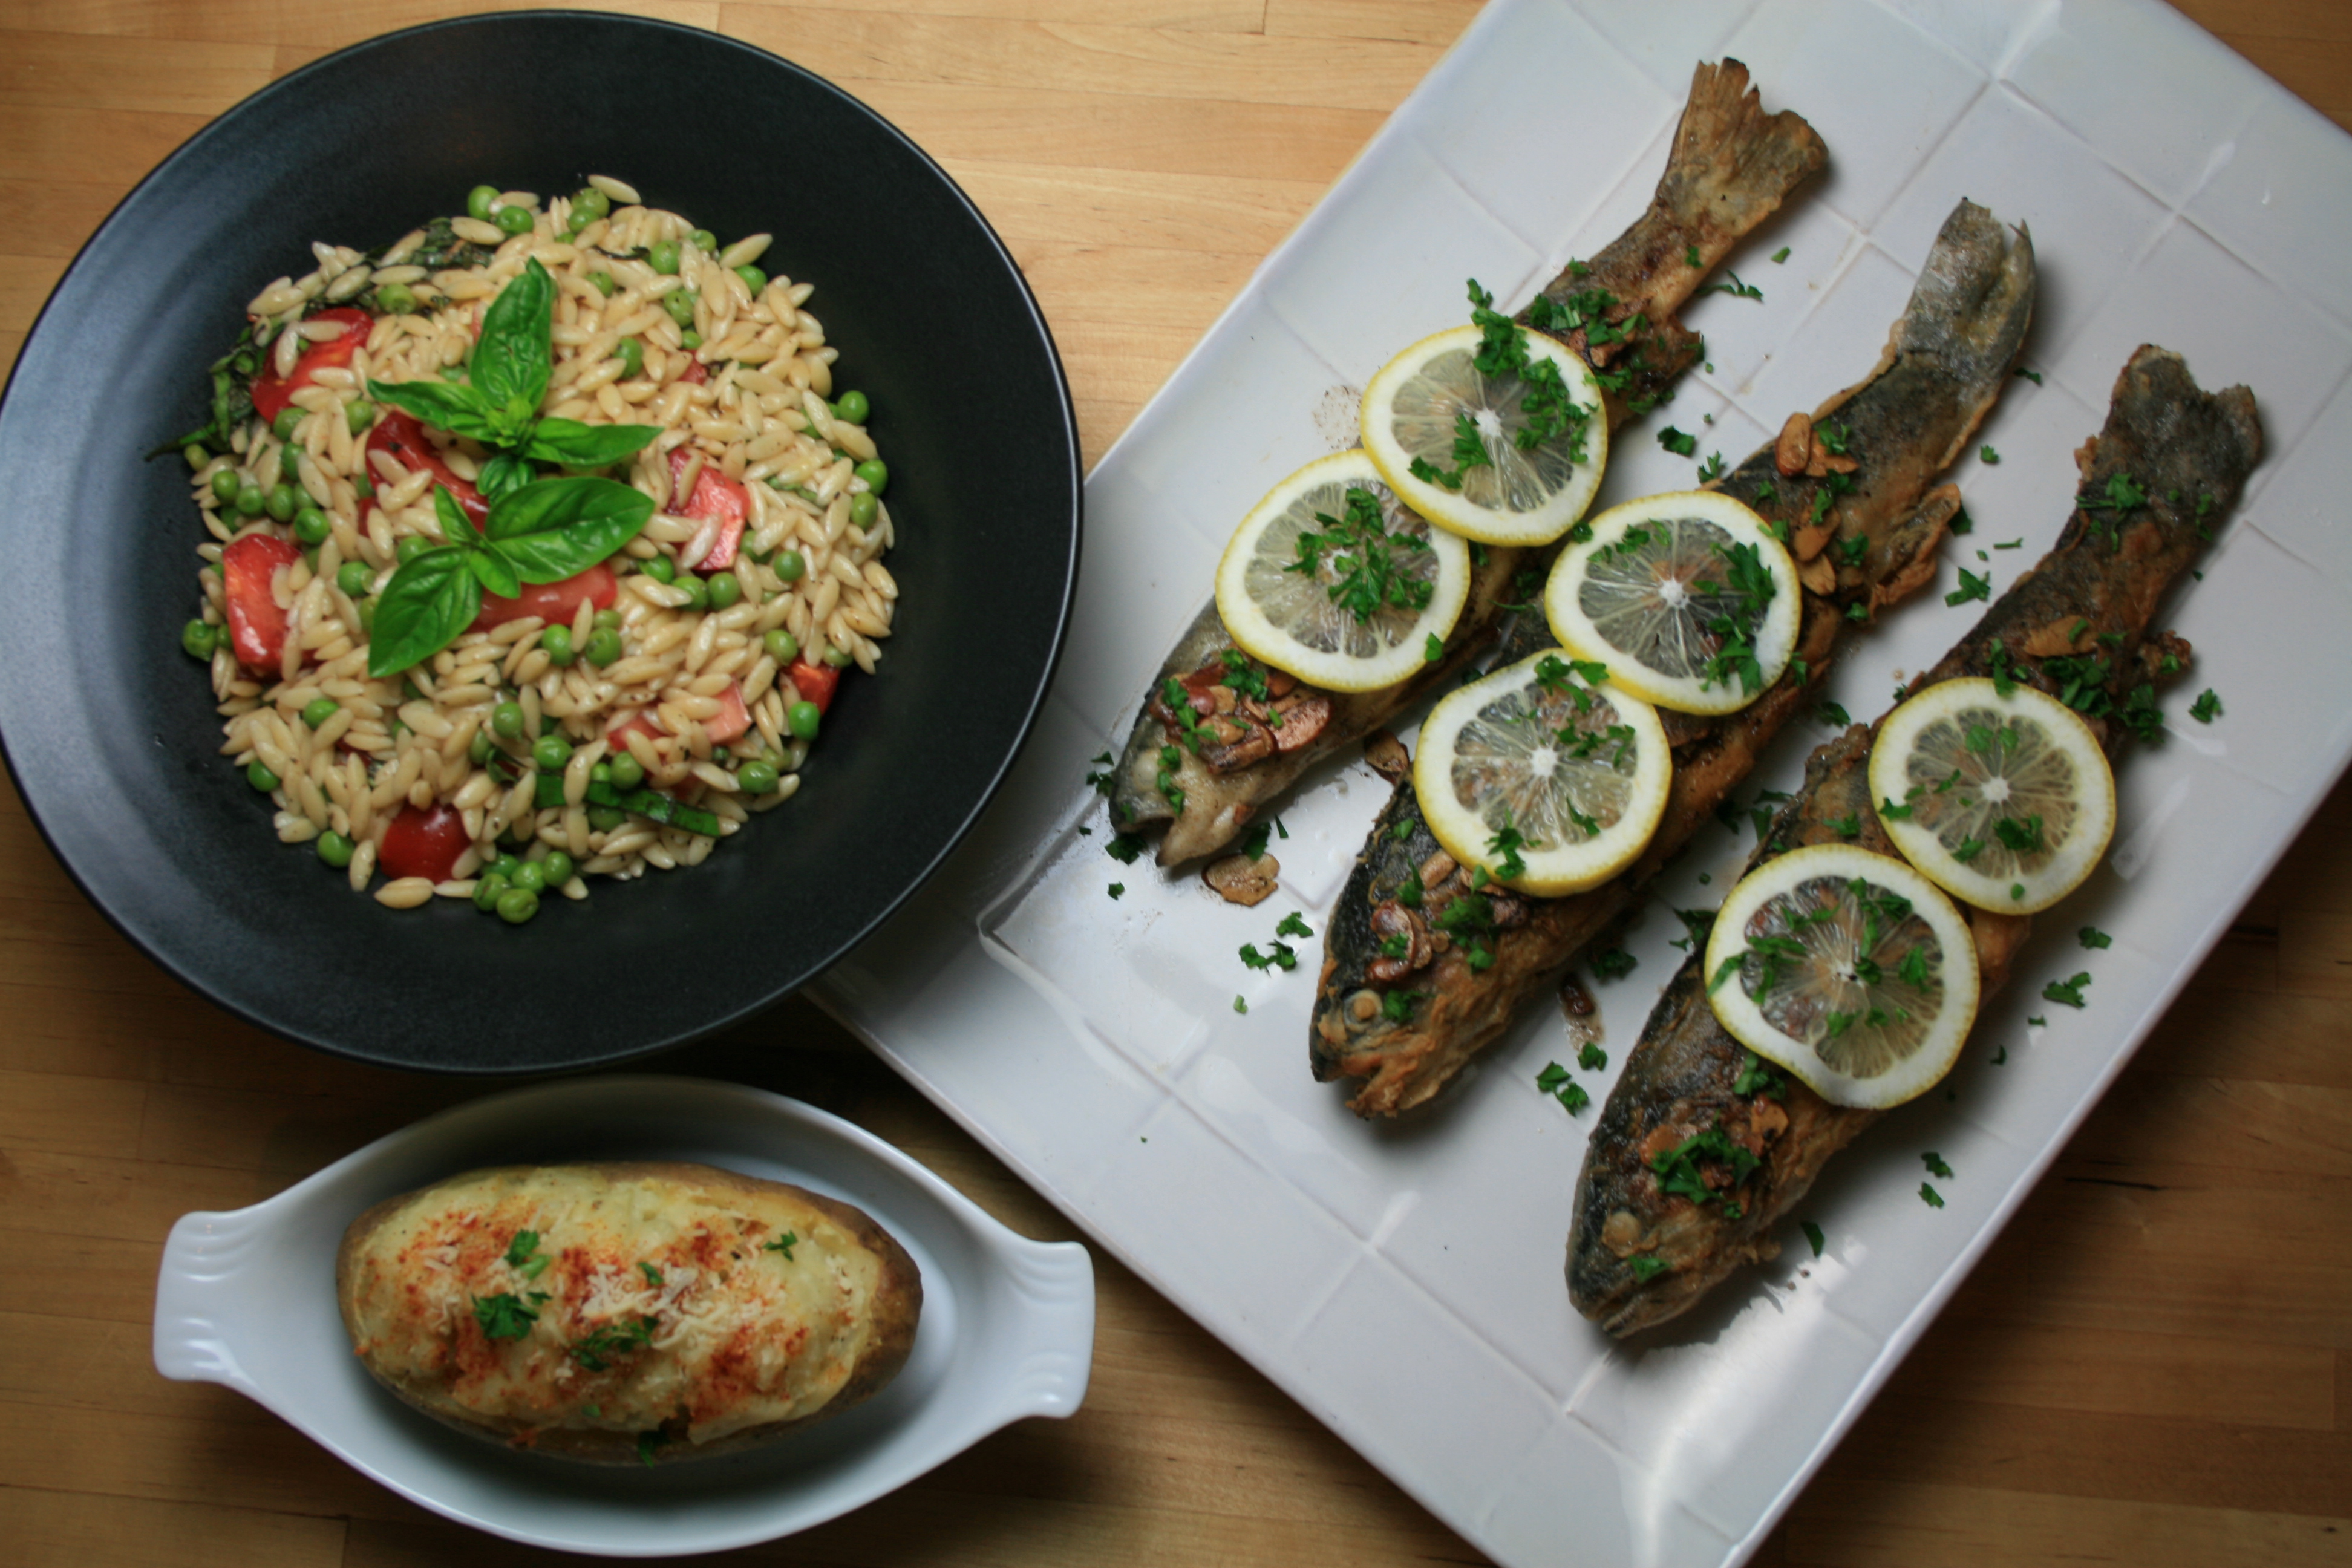 Trout almondine, orzo salad with peas and tomatoes in a balsamic vinaigrette